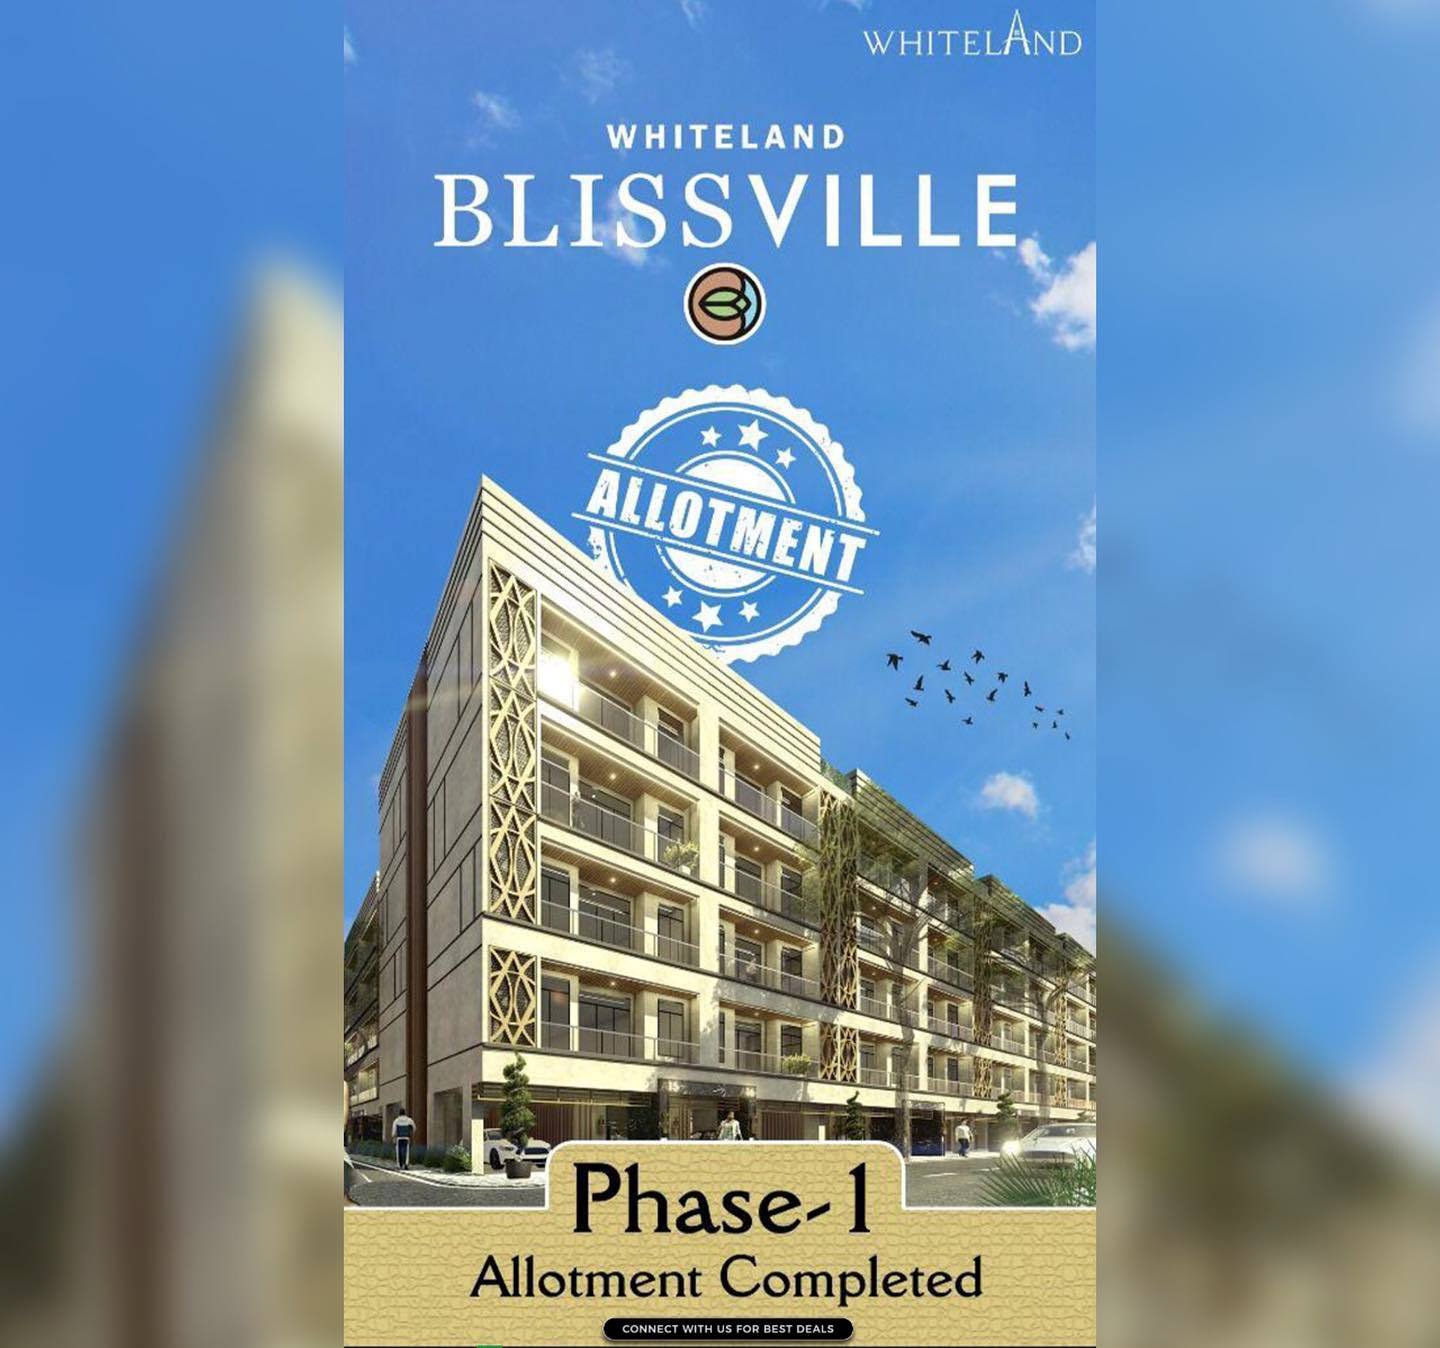 Phase 1 allotment completed at Whiteland Blissville in Sector 76, Gurgaon Update